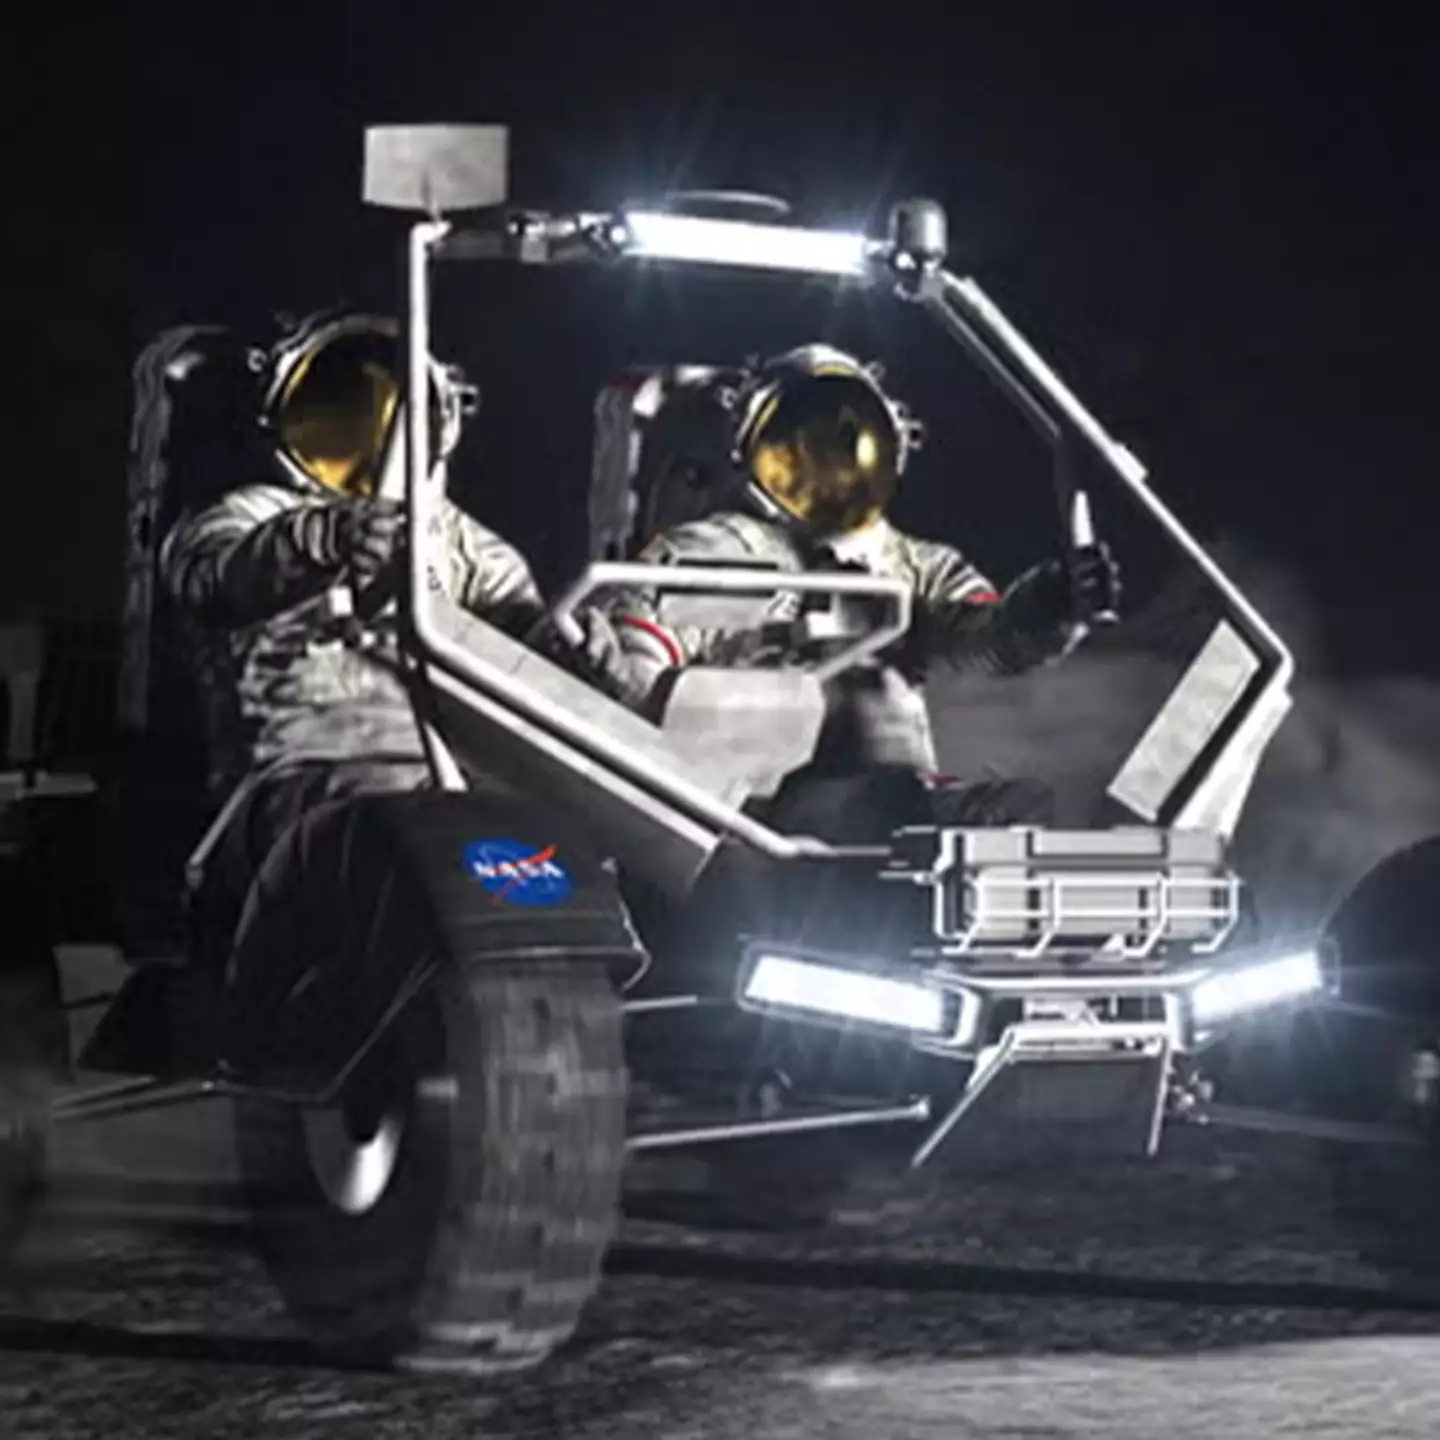 Nasa unveils lunar racer car that will take Moon astronauts to destinations ‘unreachable’ by foot